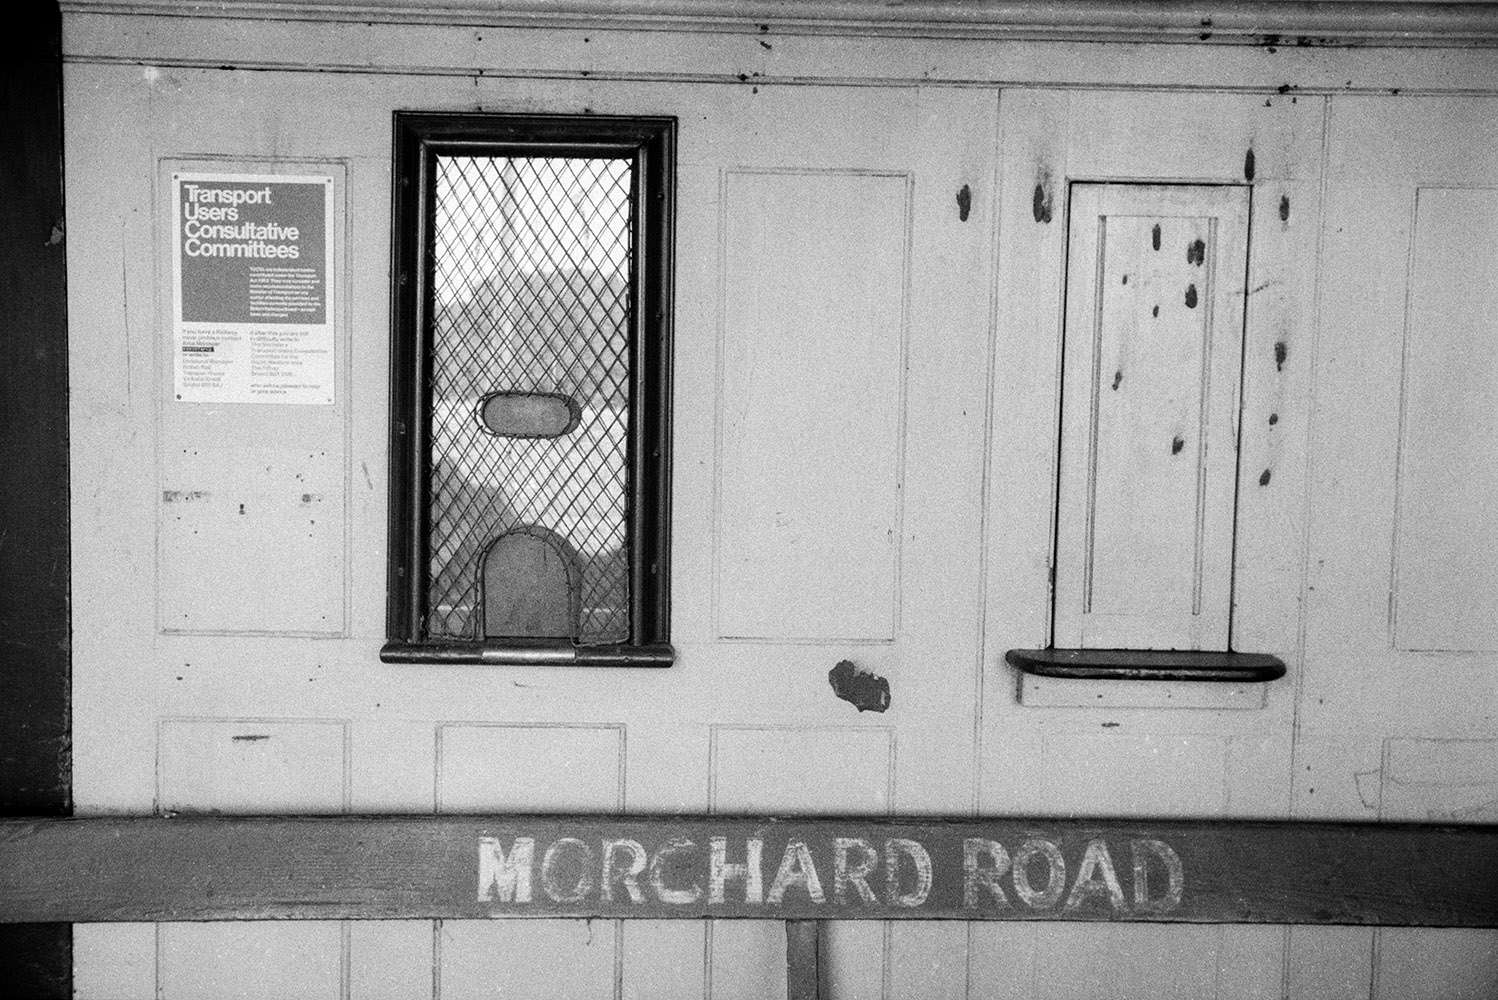 The ticket office at Morchard Road Railway Station at Down St Mary. A poster is on the wall next to the ticket office.